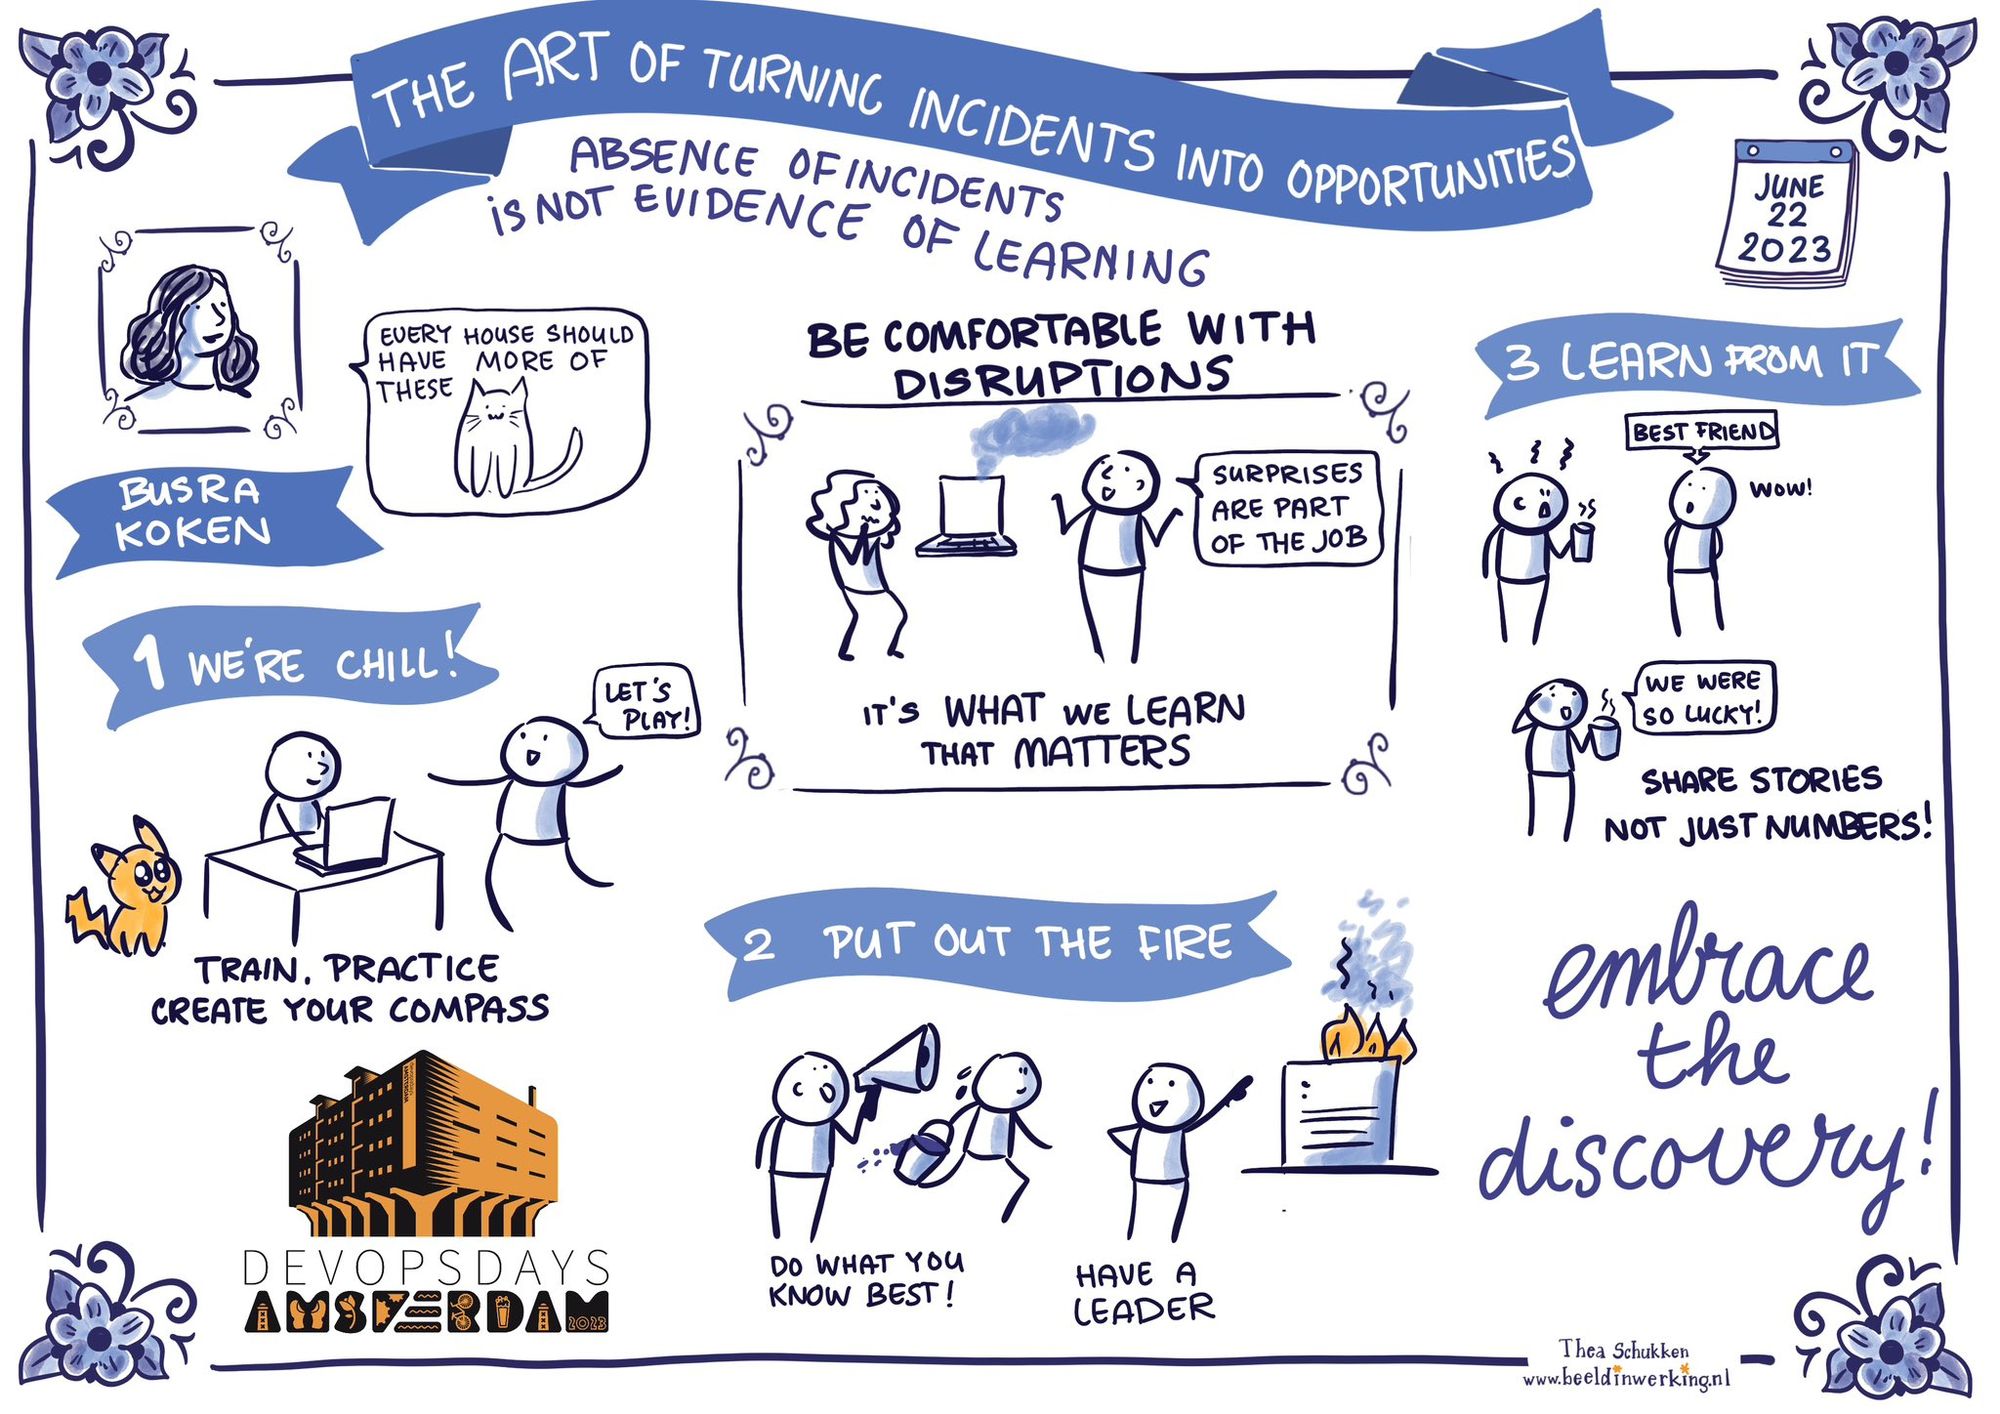 The art of turning incidents into opportunity summary drawing by Thea Schukken